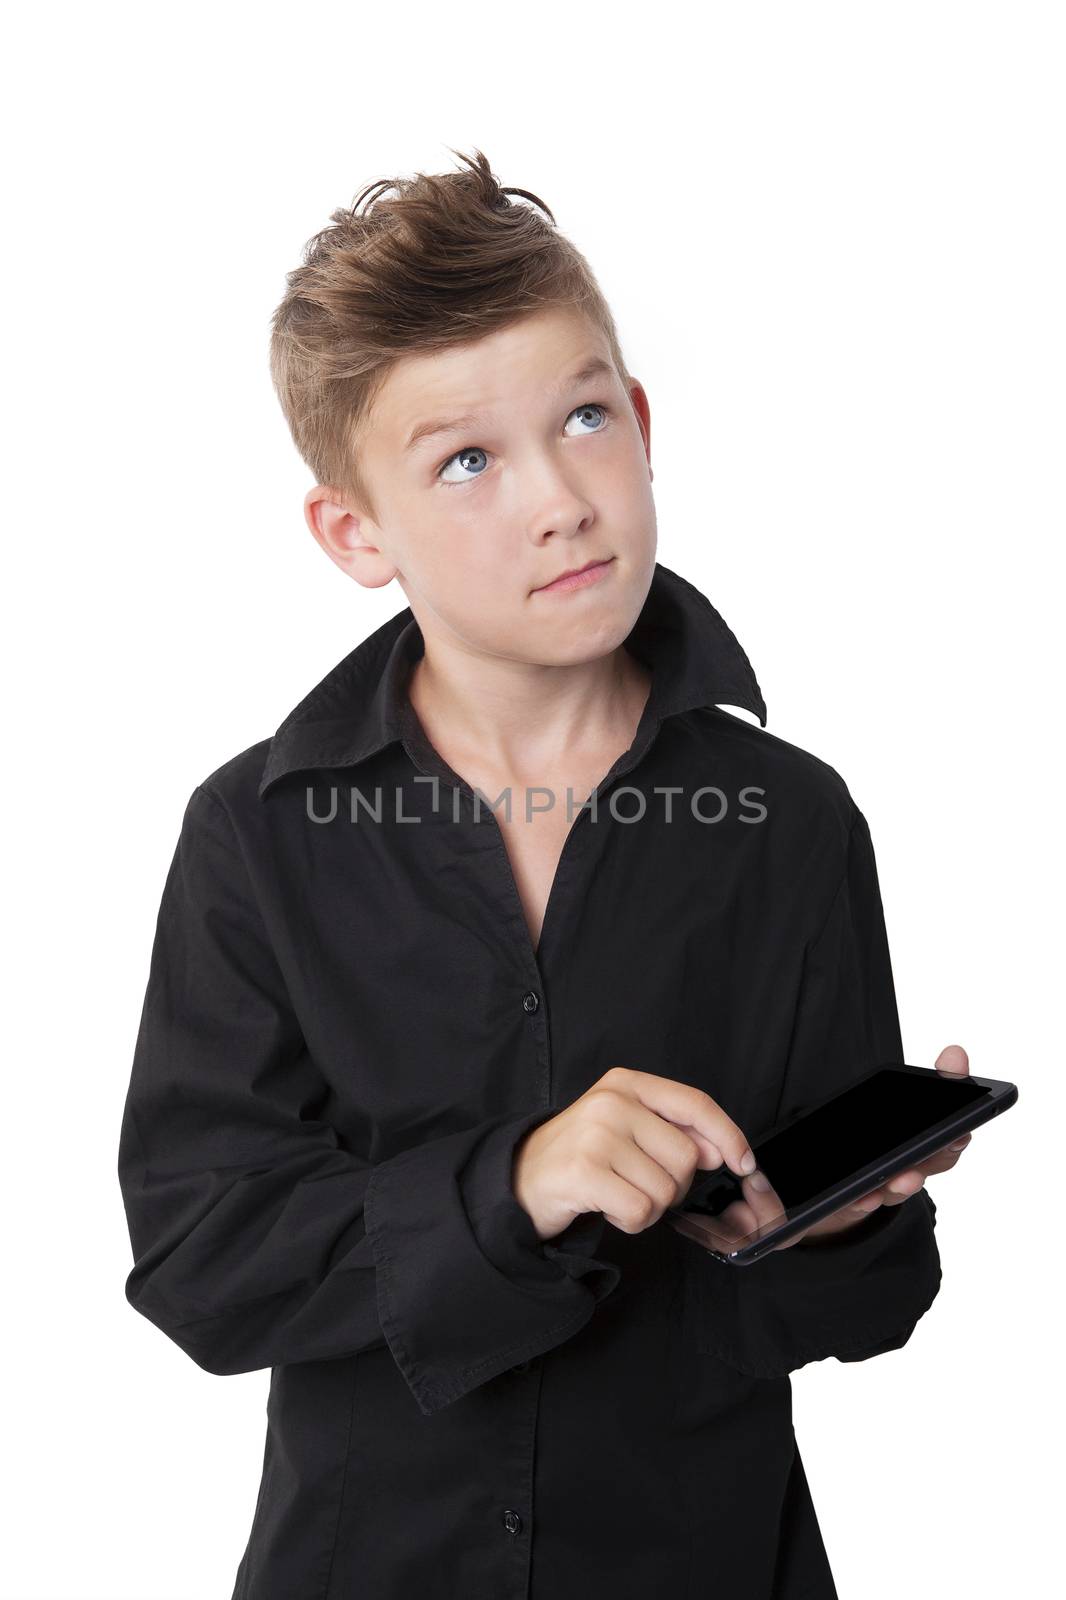 Casual boy with black dress shirt using tablet and thinking isolated on white background. Contemporary modern lifestyle.